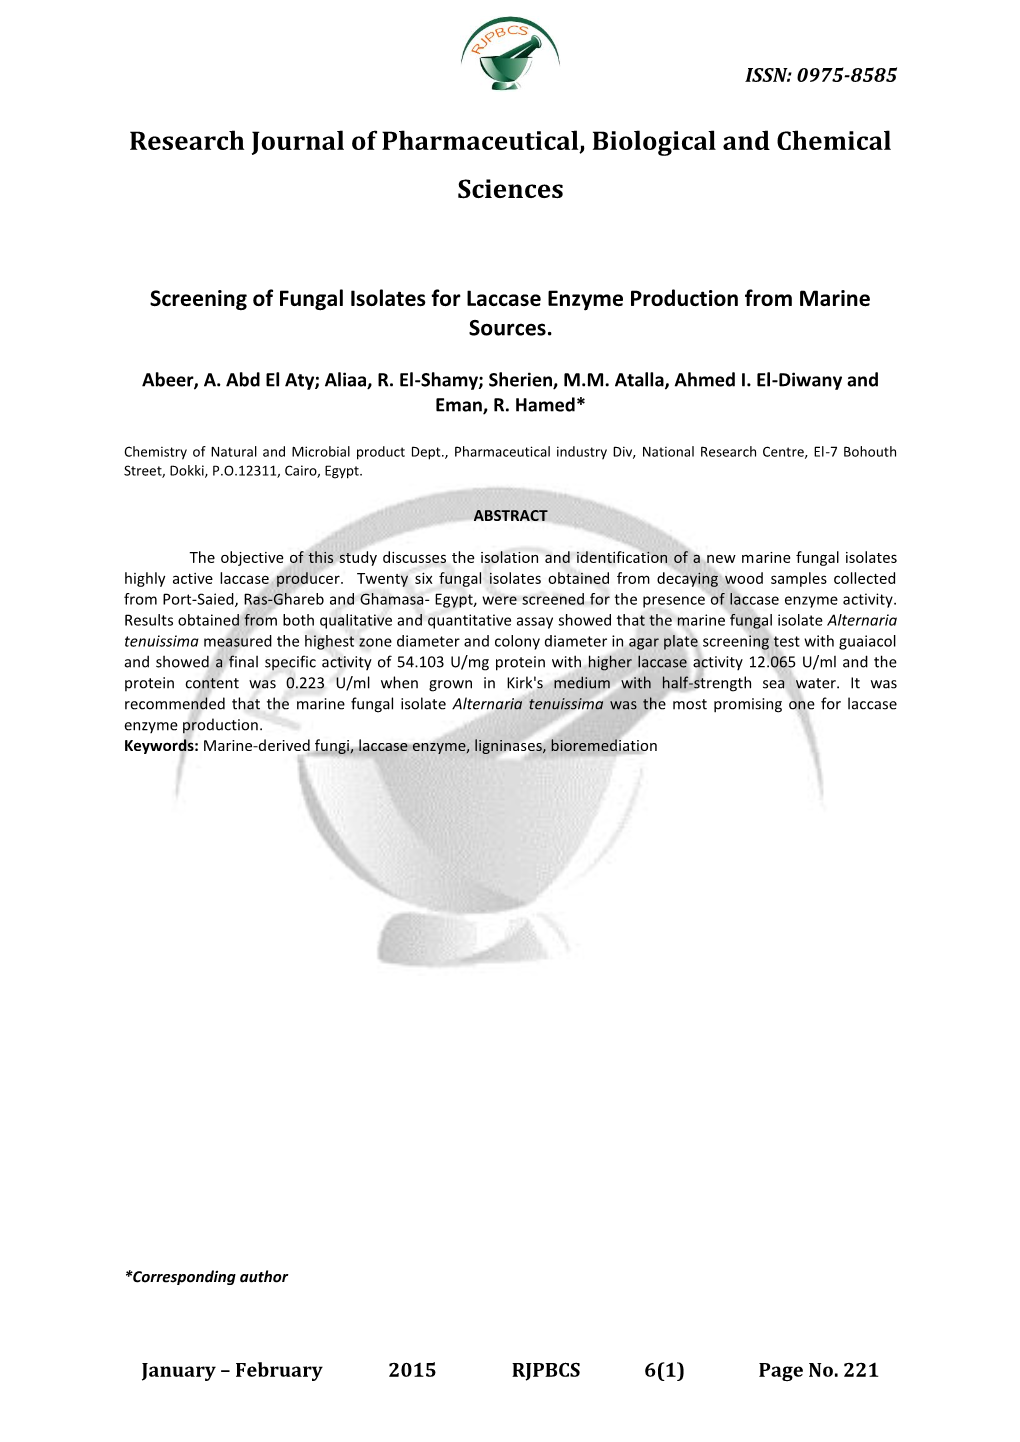 Screening of Fungal Isolates for Laccase Enzyme Production from Marine Sources